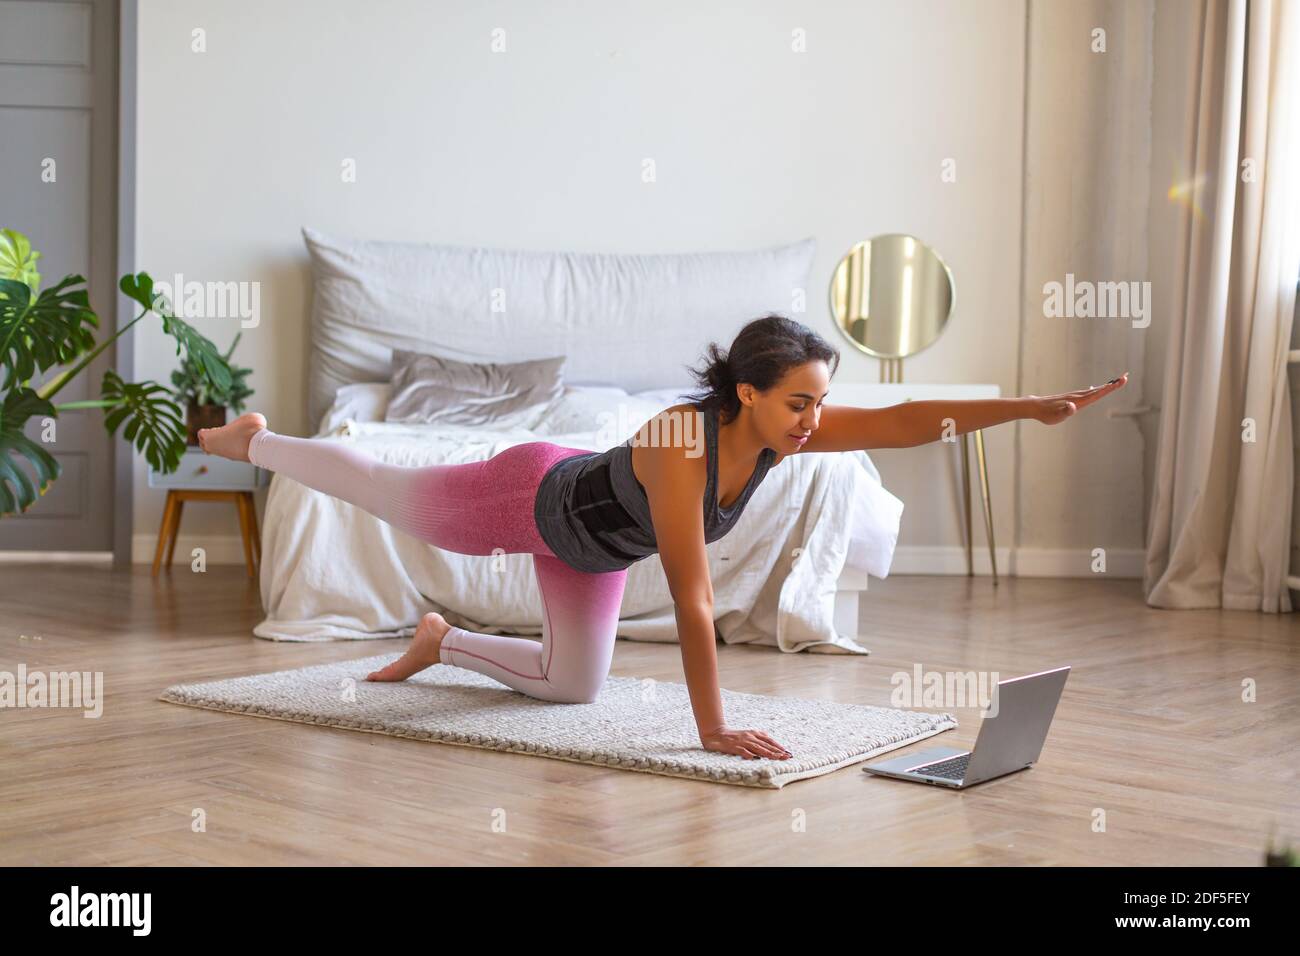 Smiling African American woman during online workout. She follows directions from a trainer on the Internet. Stock Photo